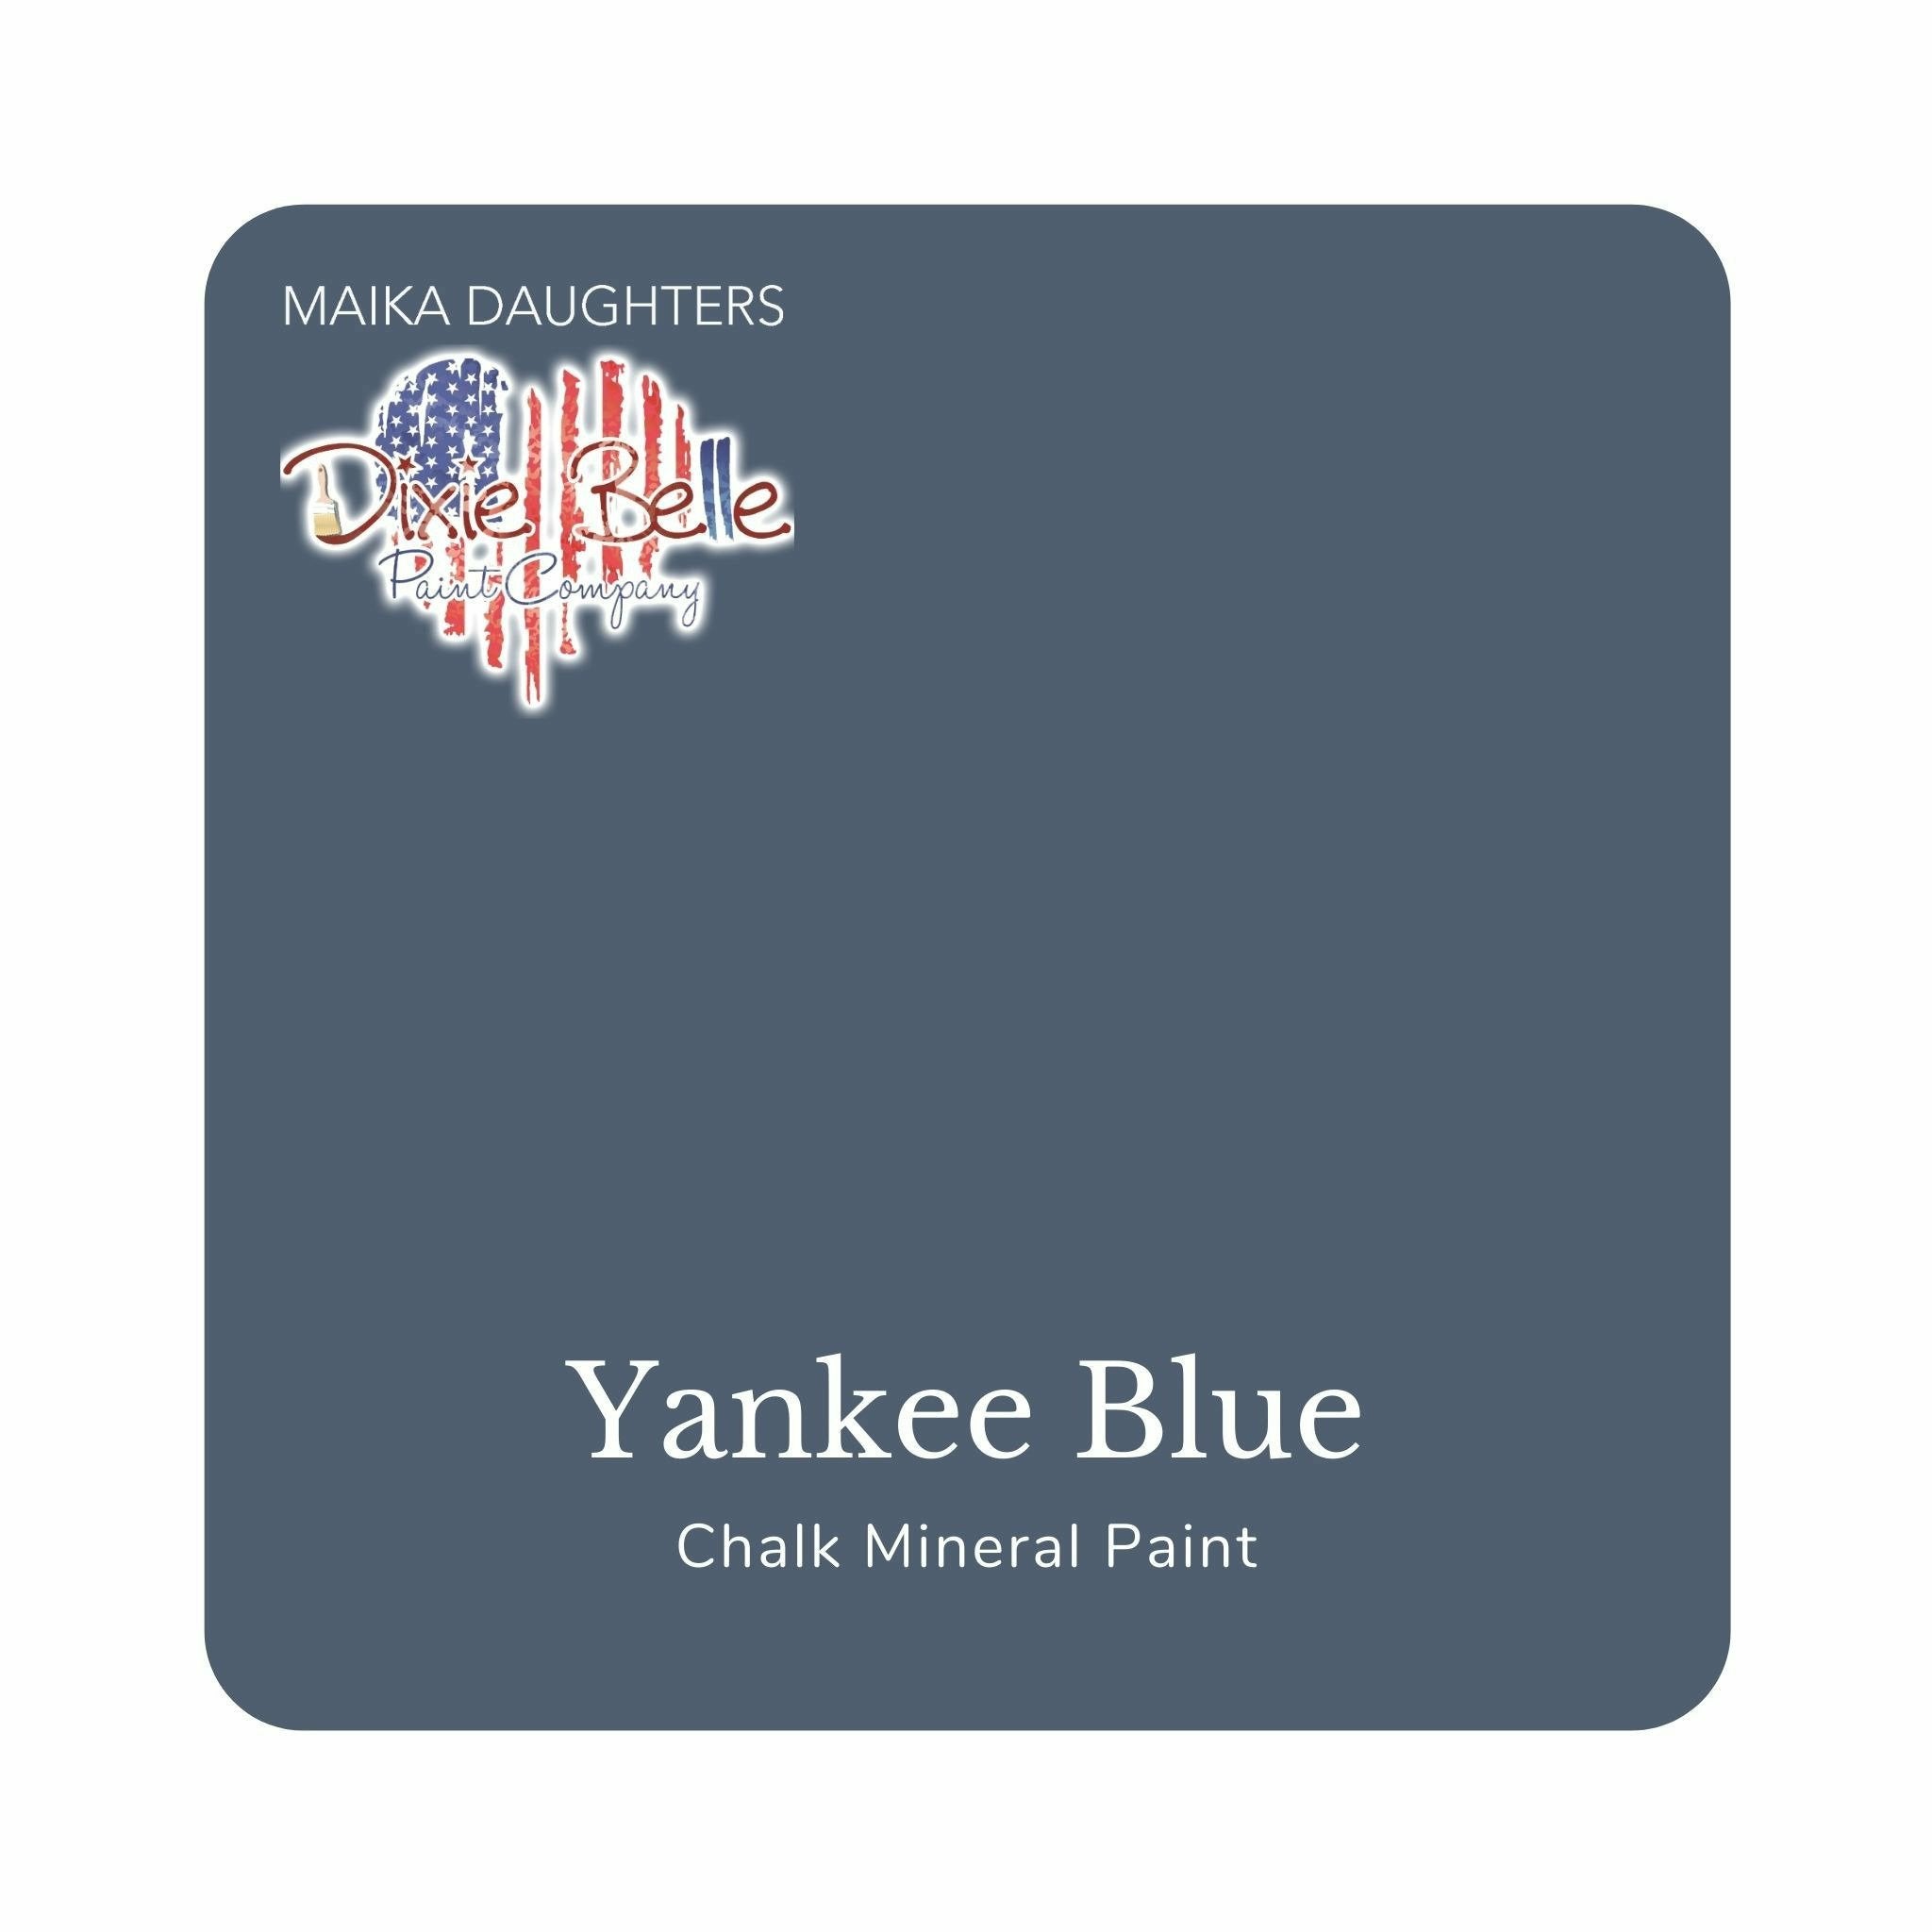 A square swatch card of Dixie Belle Paint Company’s Yankee Blue Chalk Mineral Paint is against a white background. This color is an aegean slate gray.